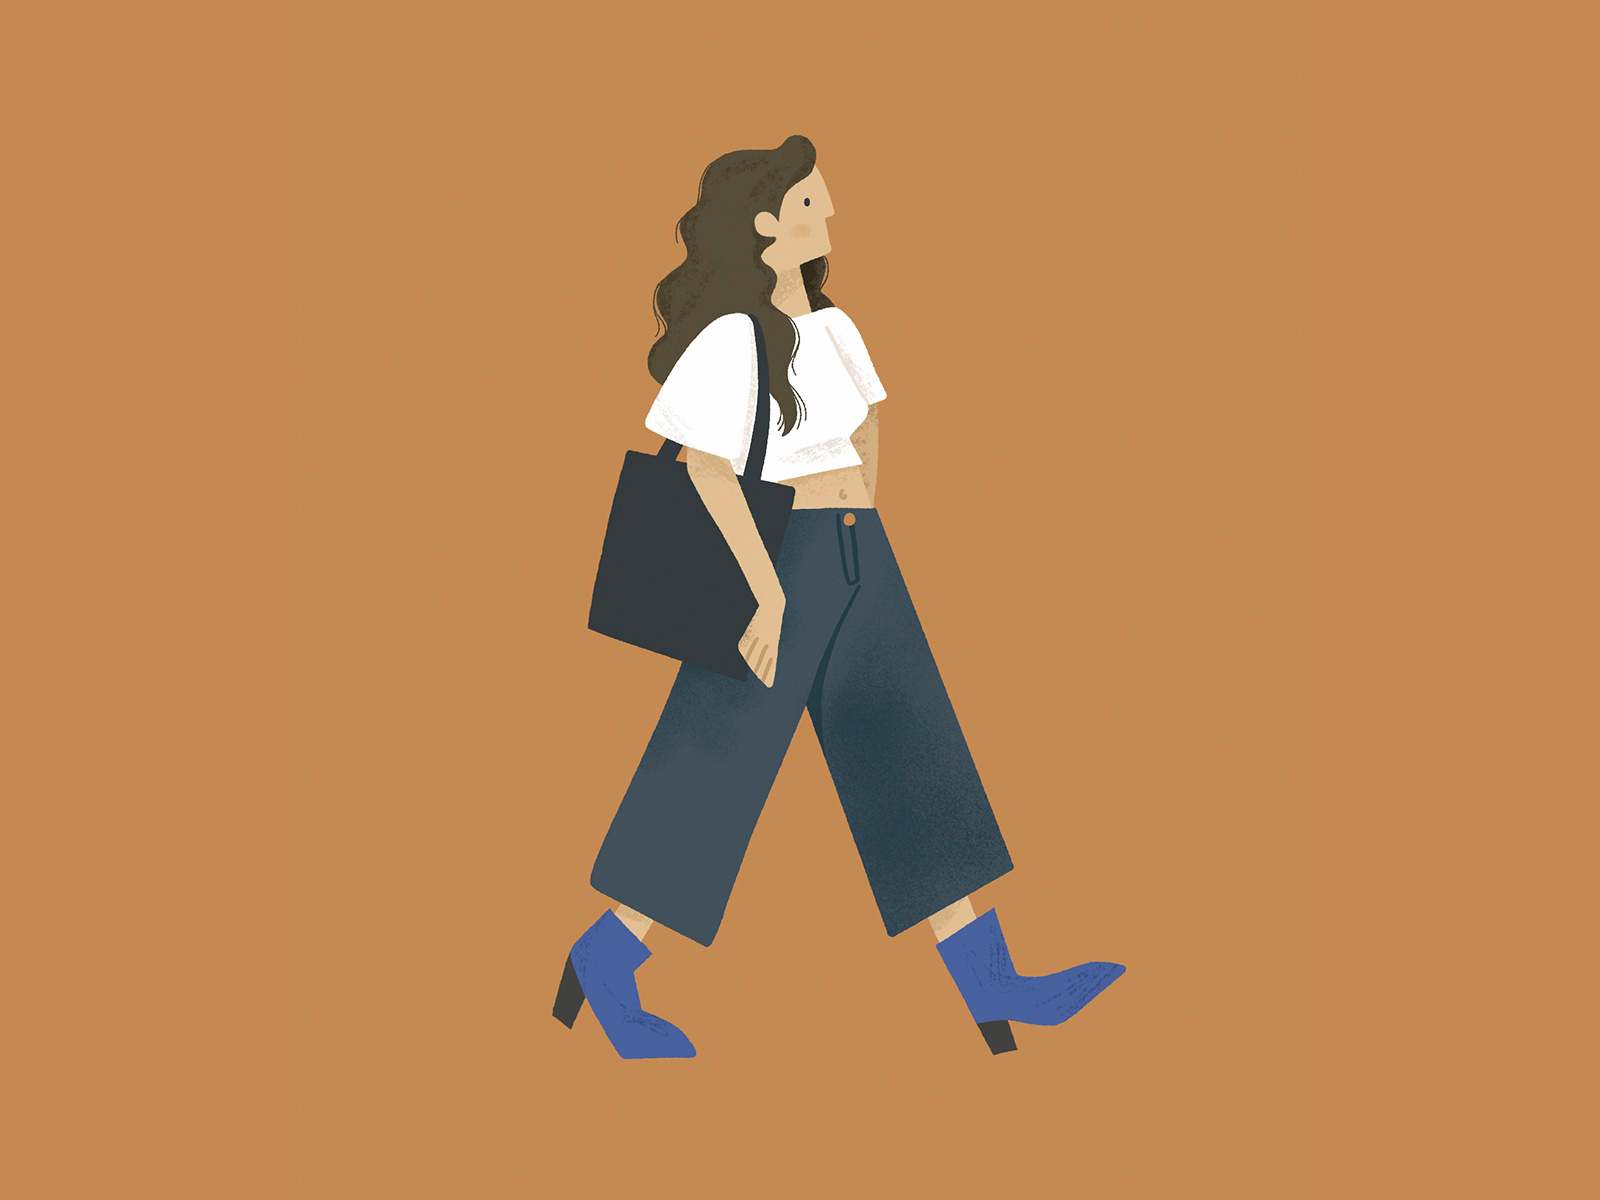 Sunday Morning Stroll by Alisa Wismer on Dribbble